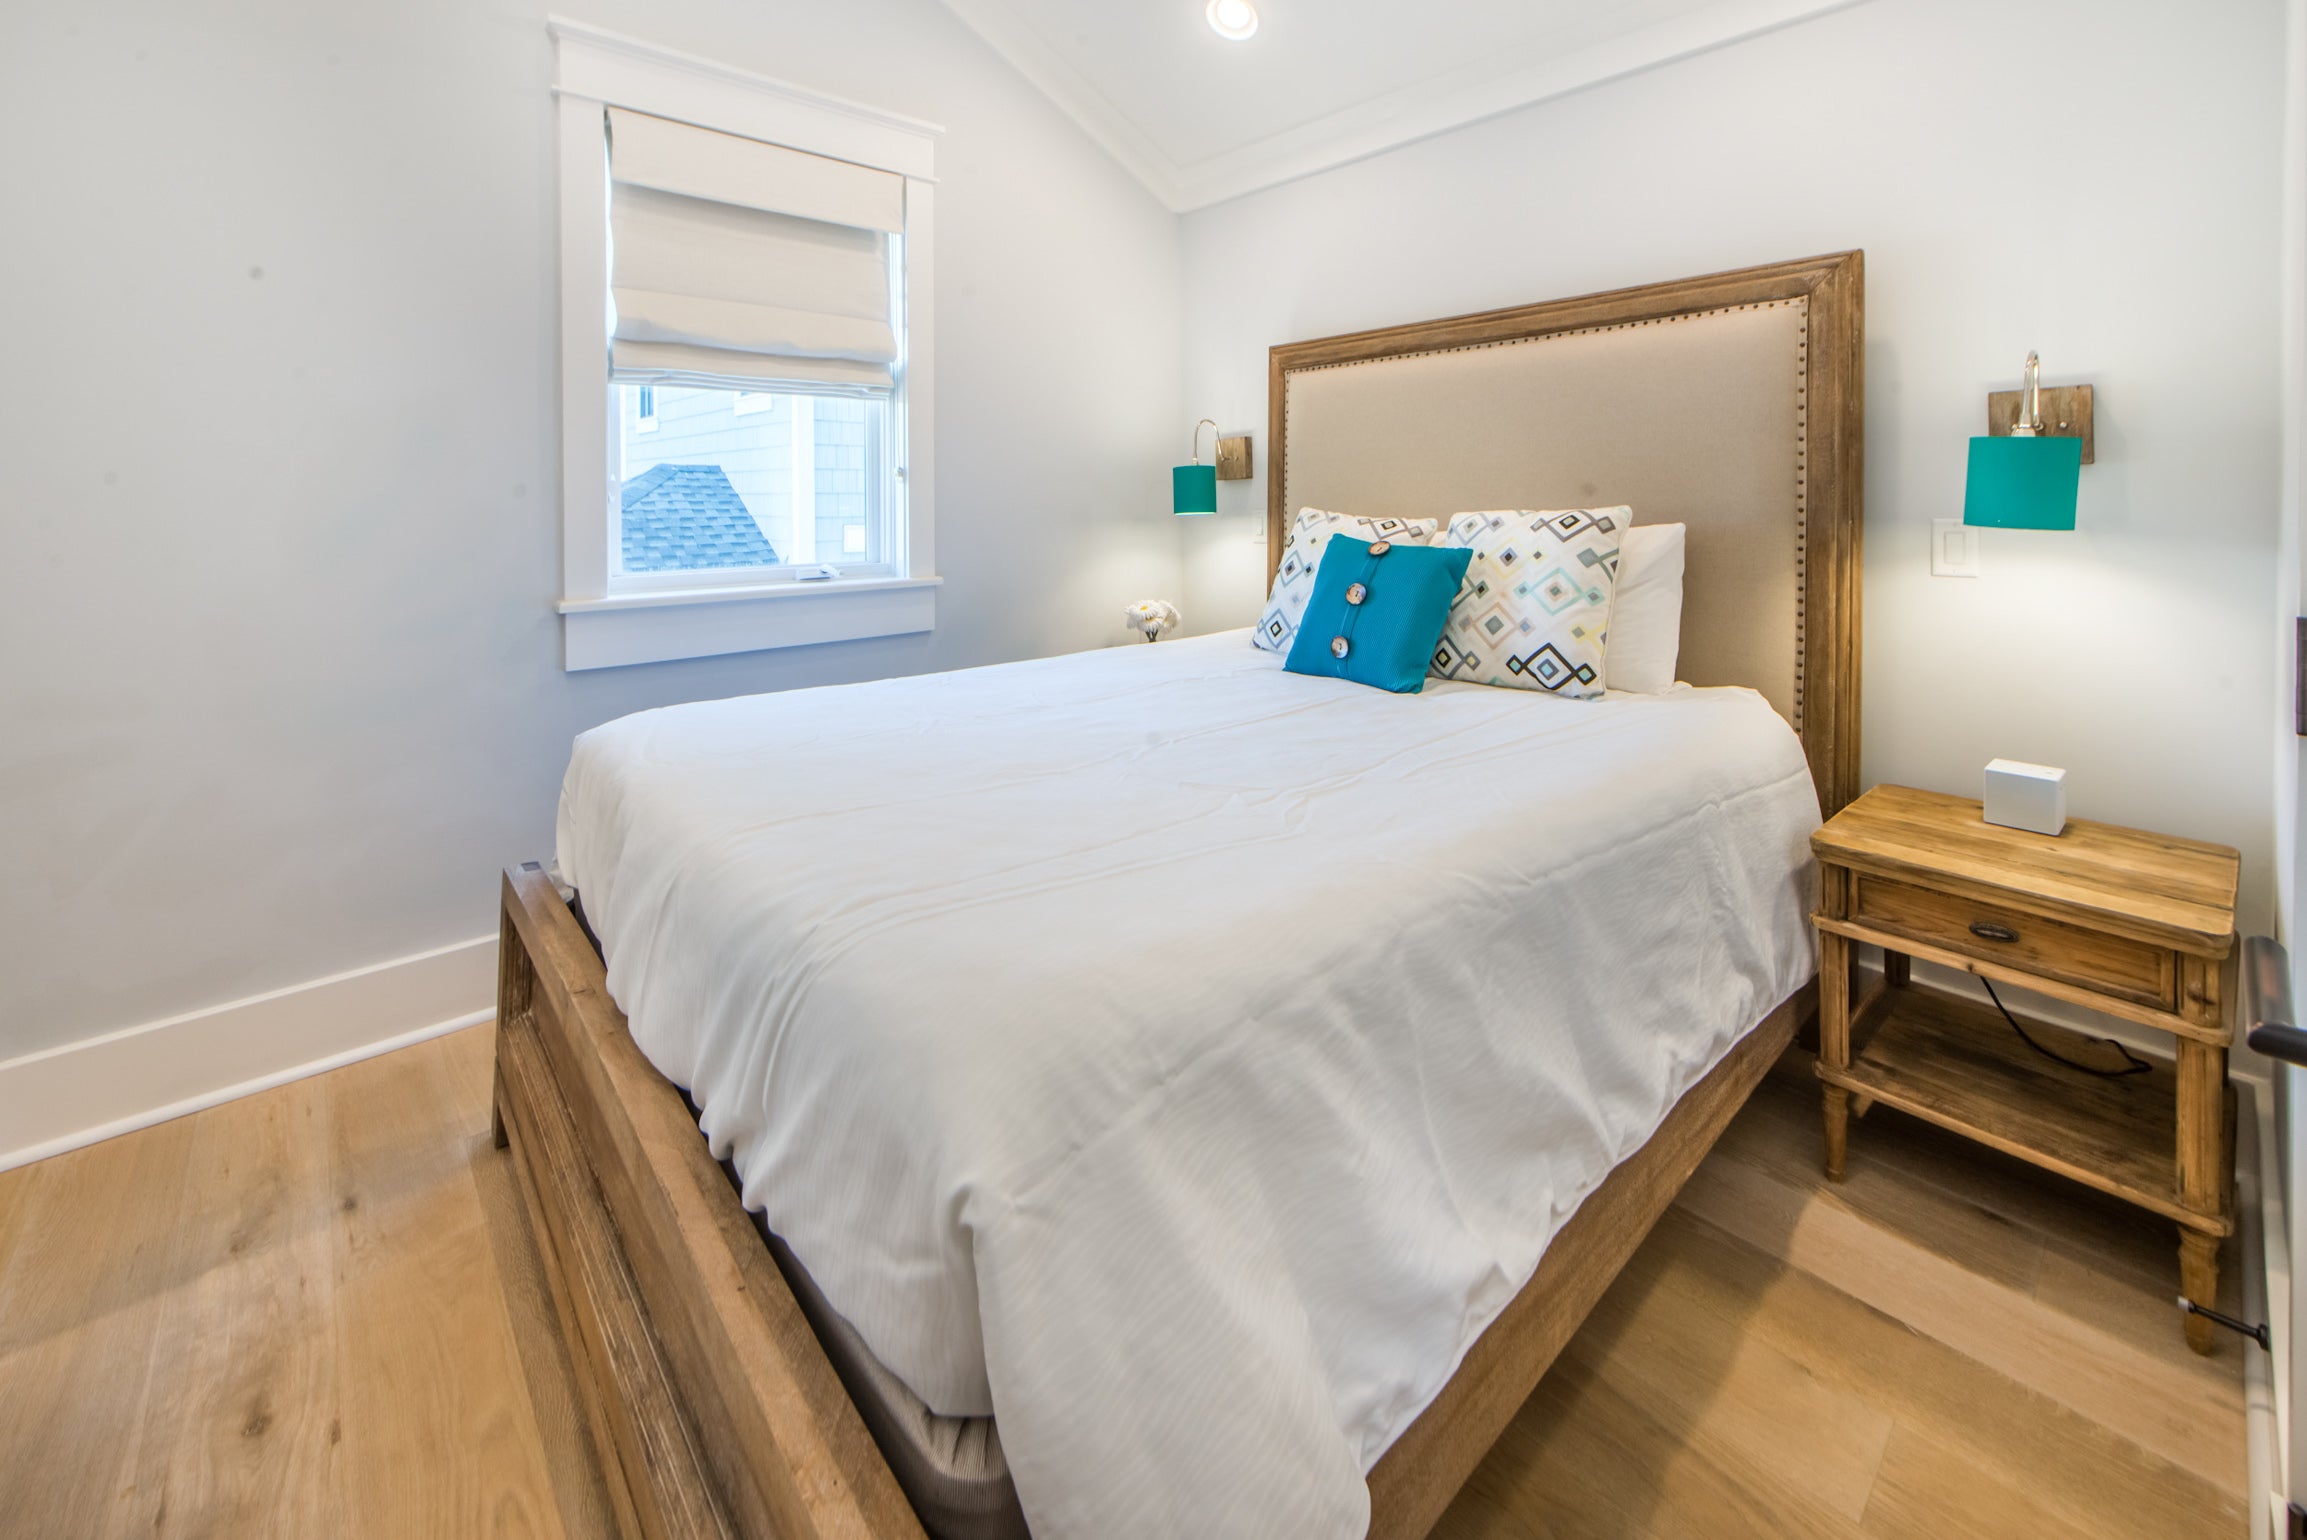 Carriage House bedroom